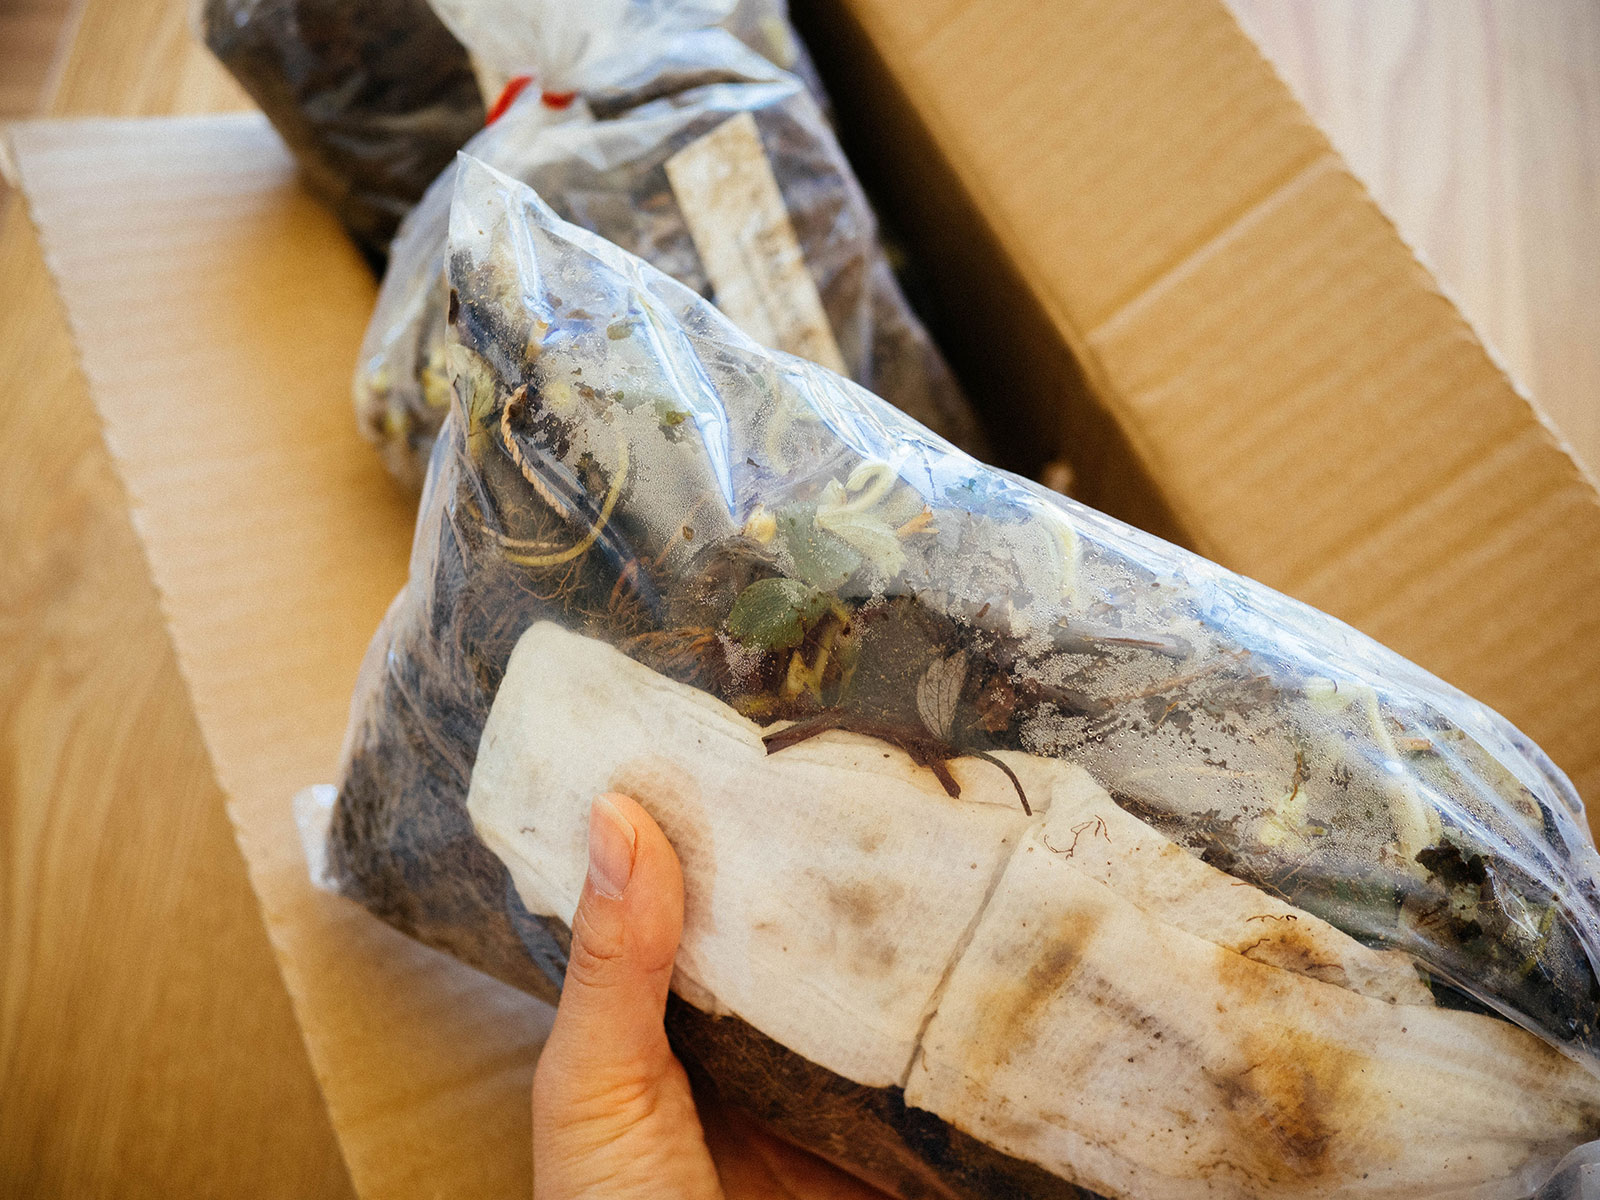 Hand holding a plastic bag filled with bare-root strawberry bundles and a paper towel inside